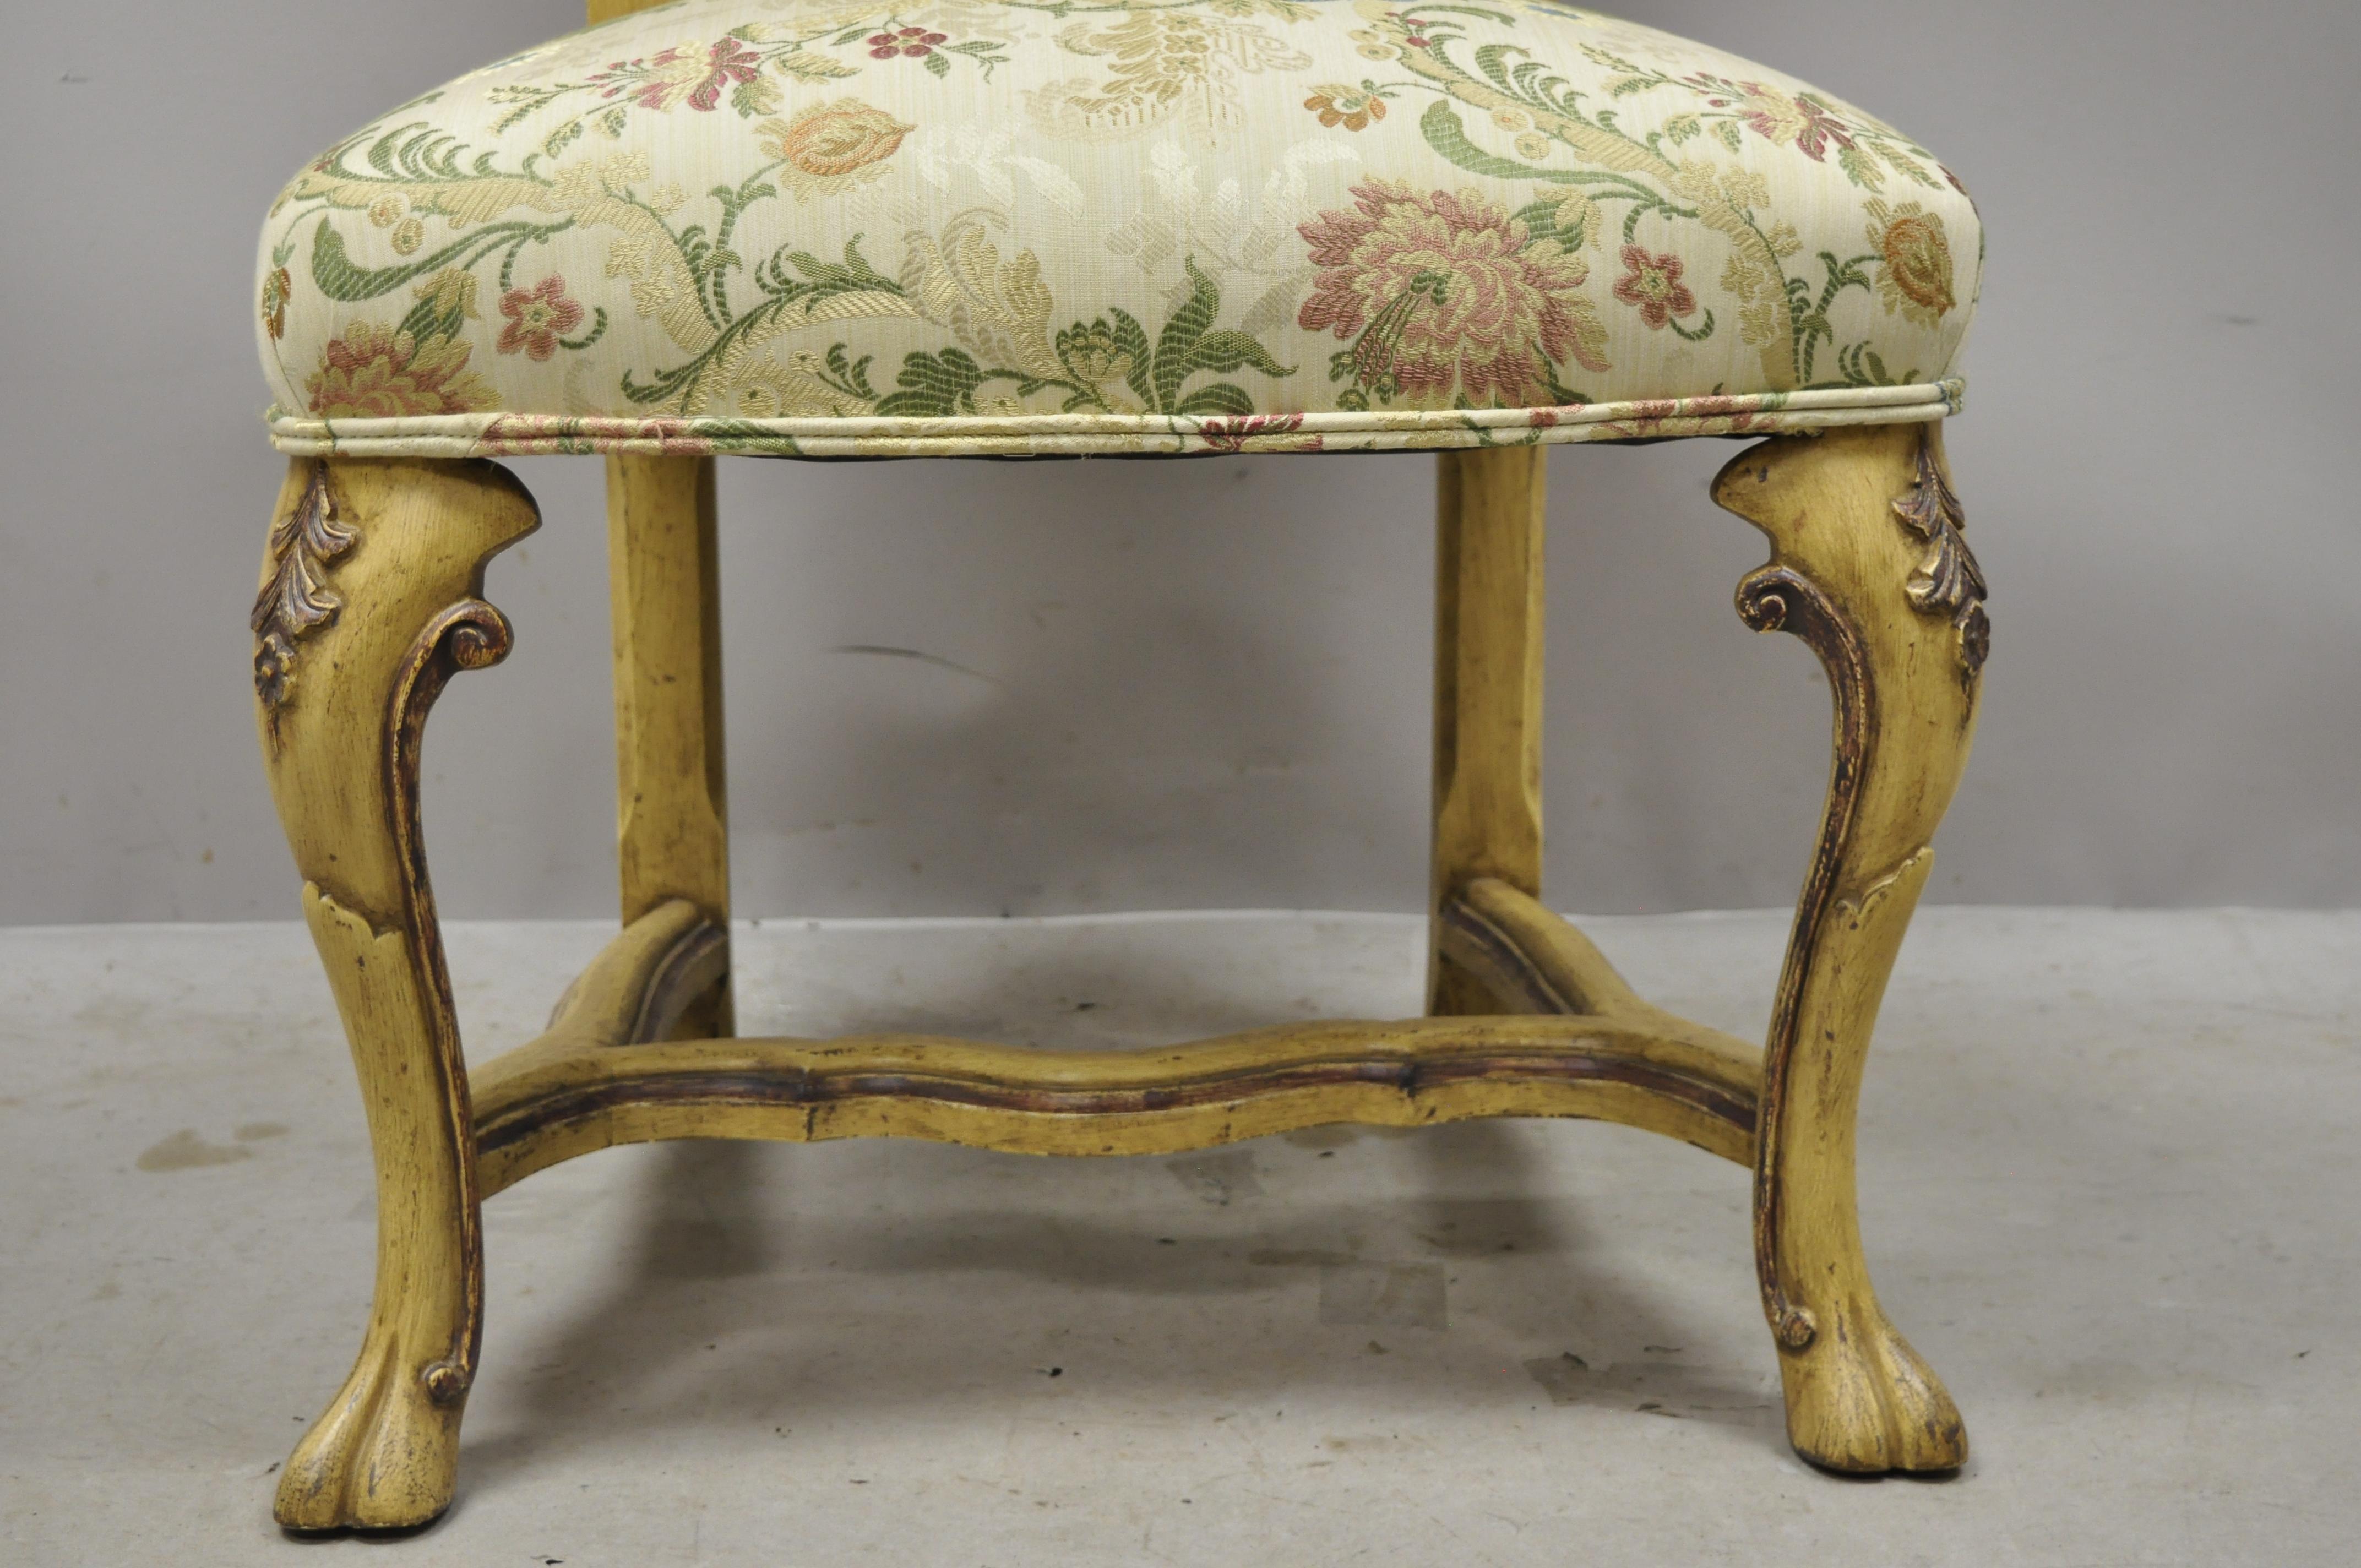 Fabric Minton Spidell Italian Regency Rococo Cream Painted Dining Chairs, Set of 4 For Sale